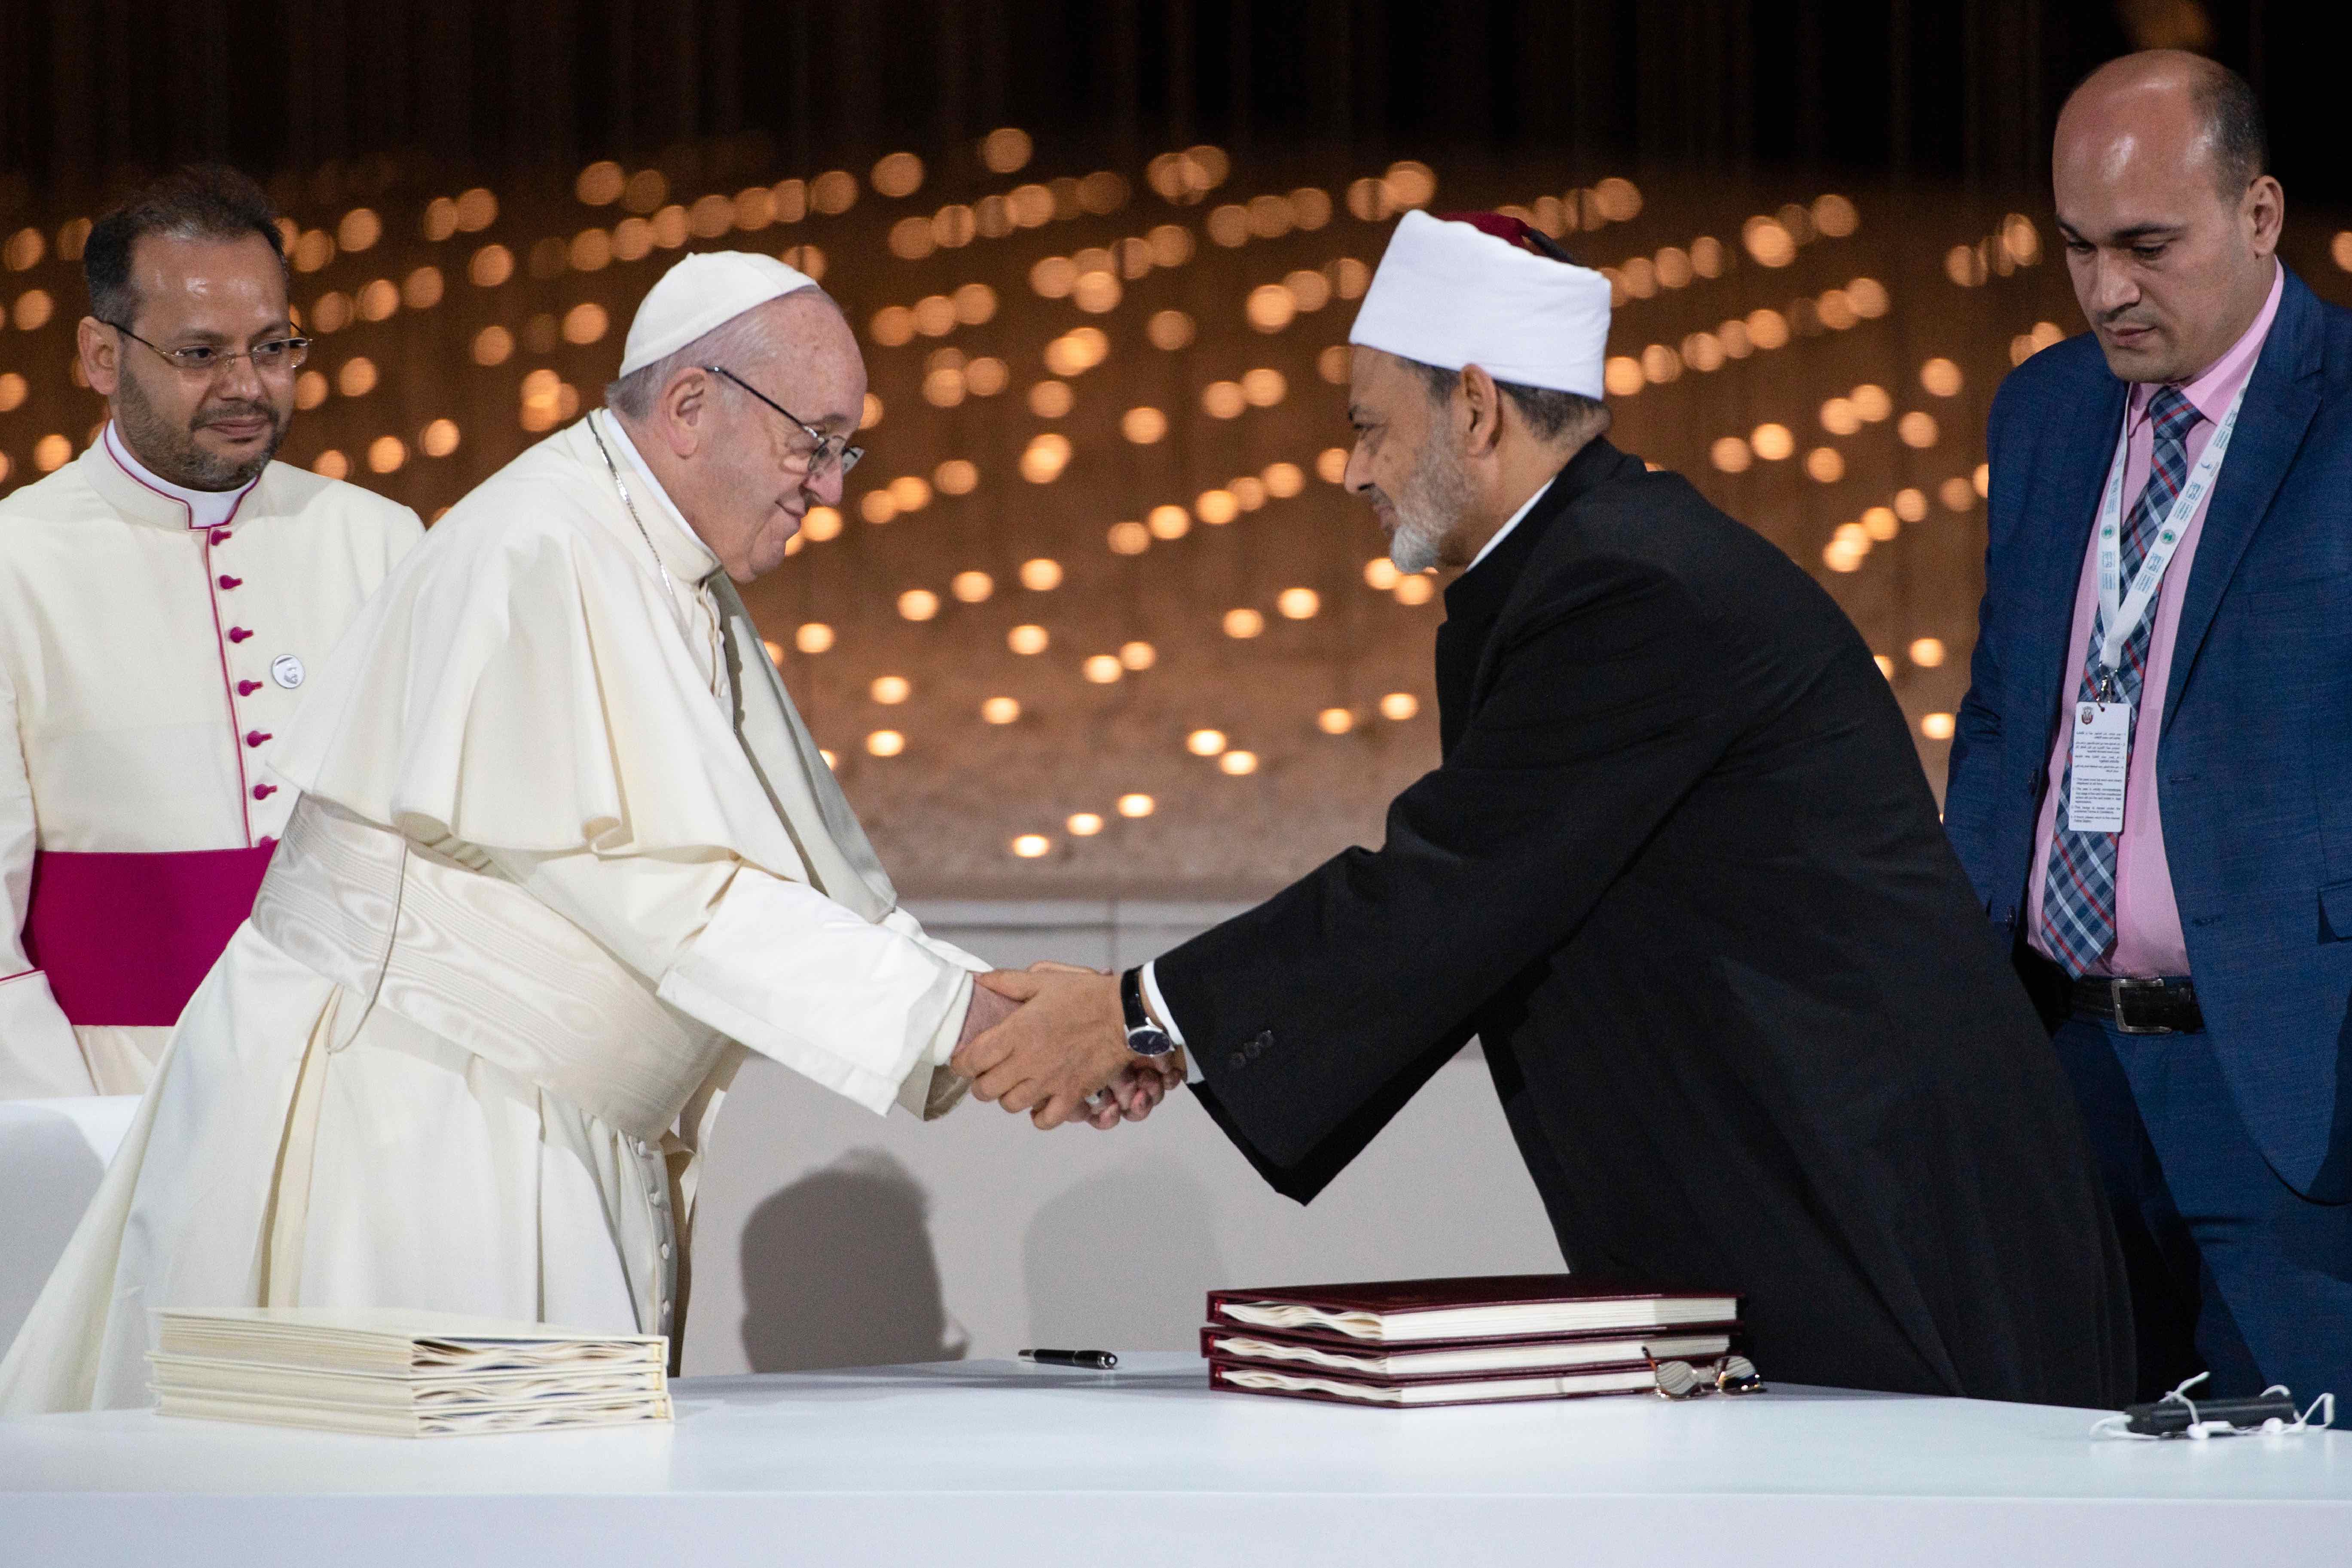 Committee formed to promote document signed by pope, grand imam on Muslim-Catholic dialogue